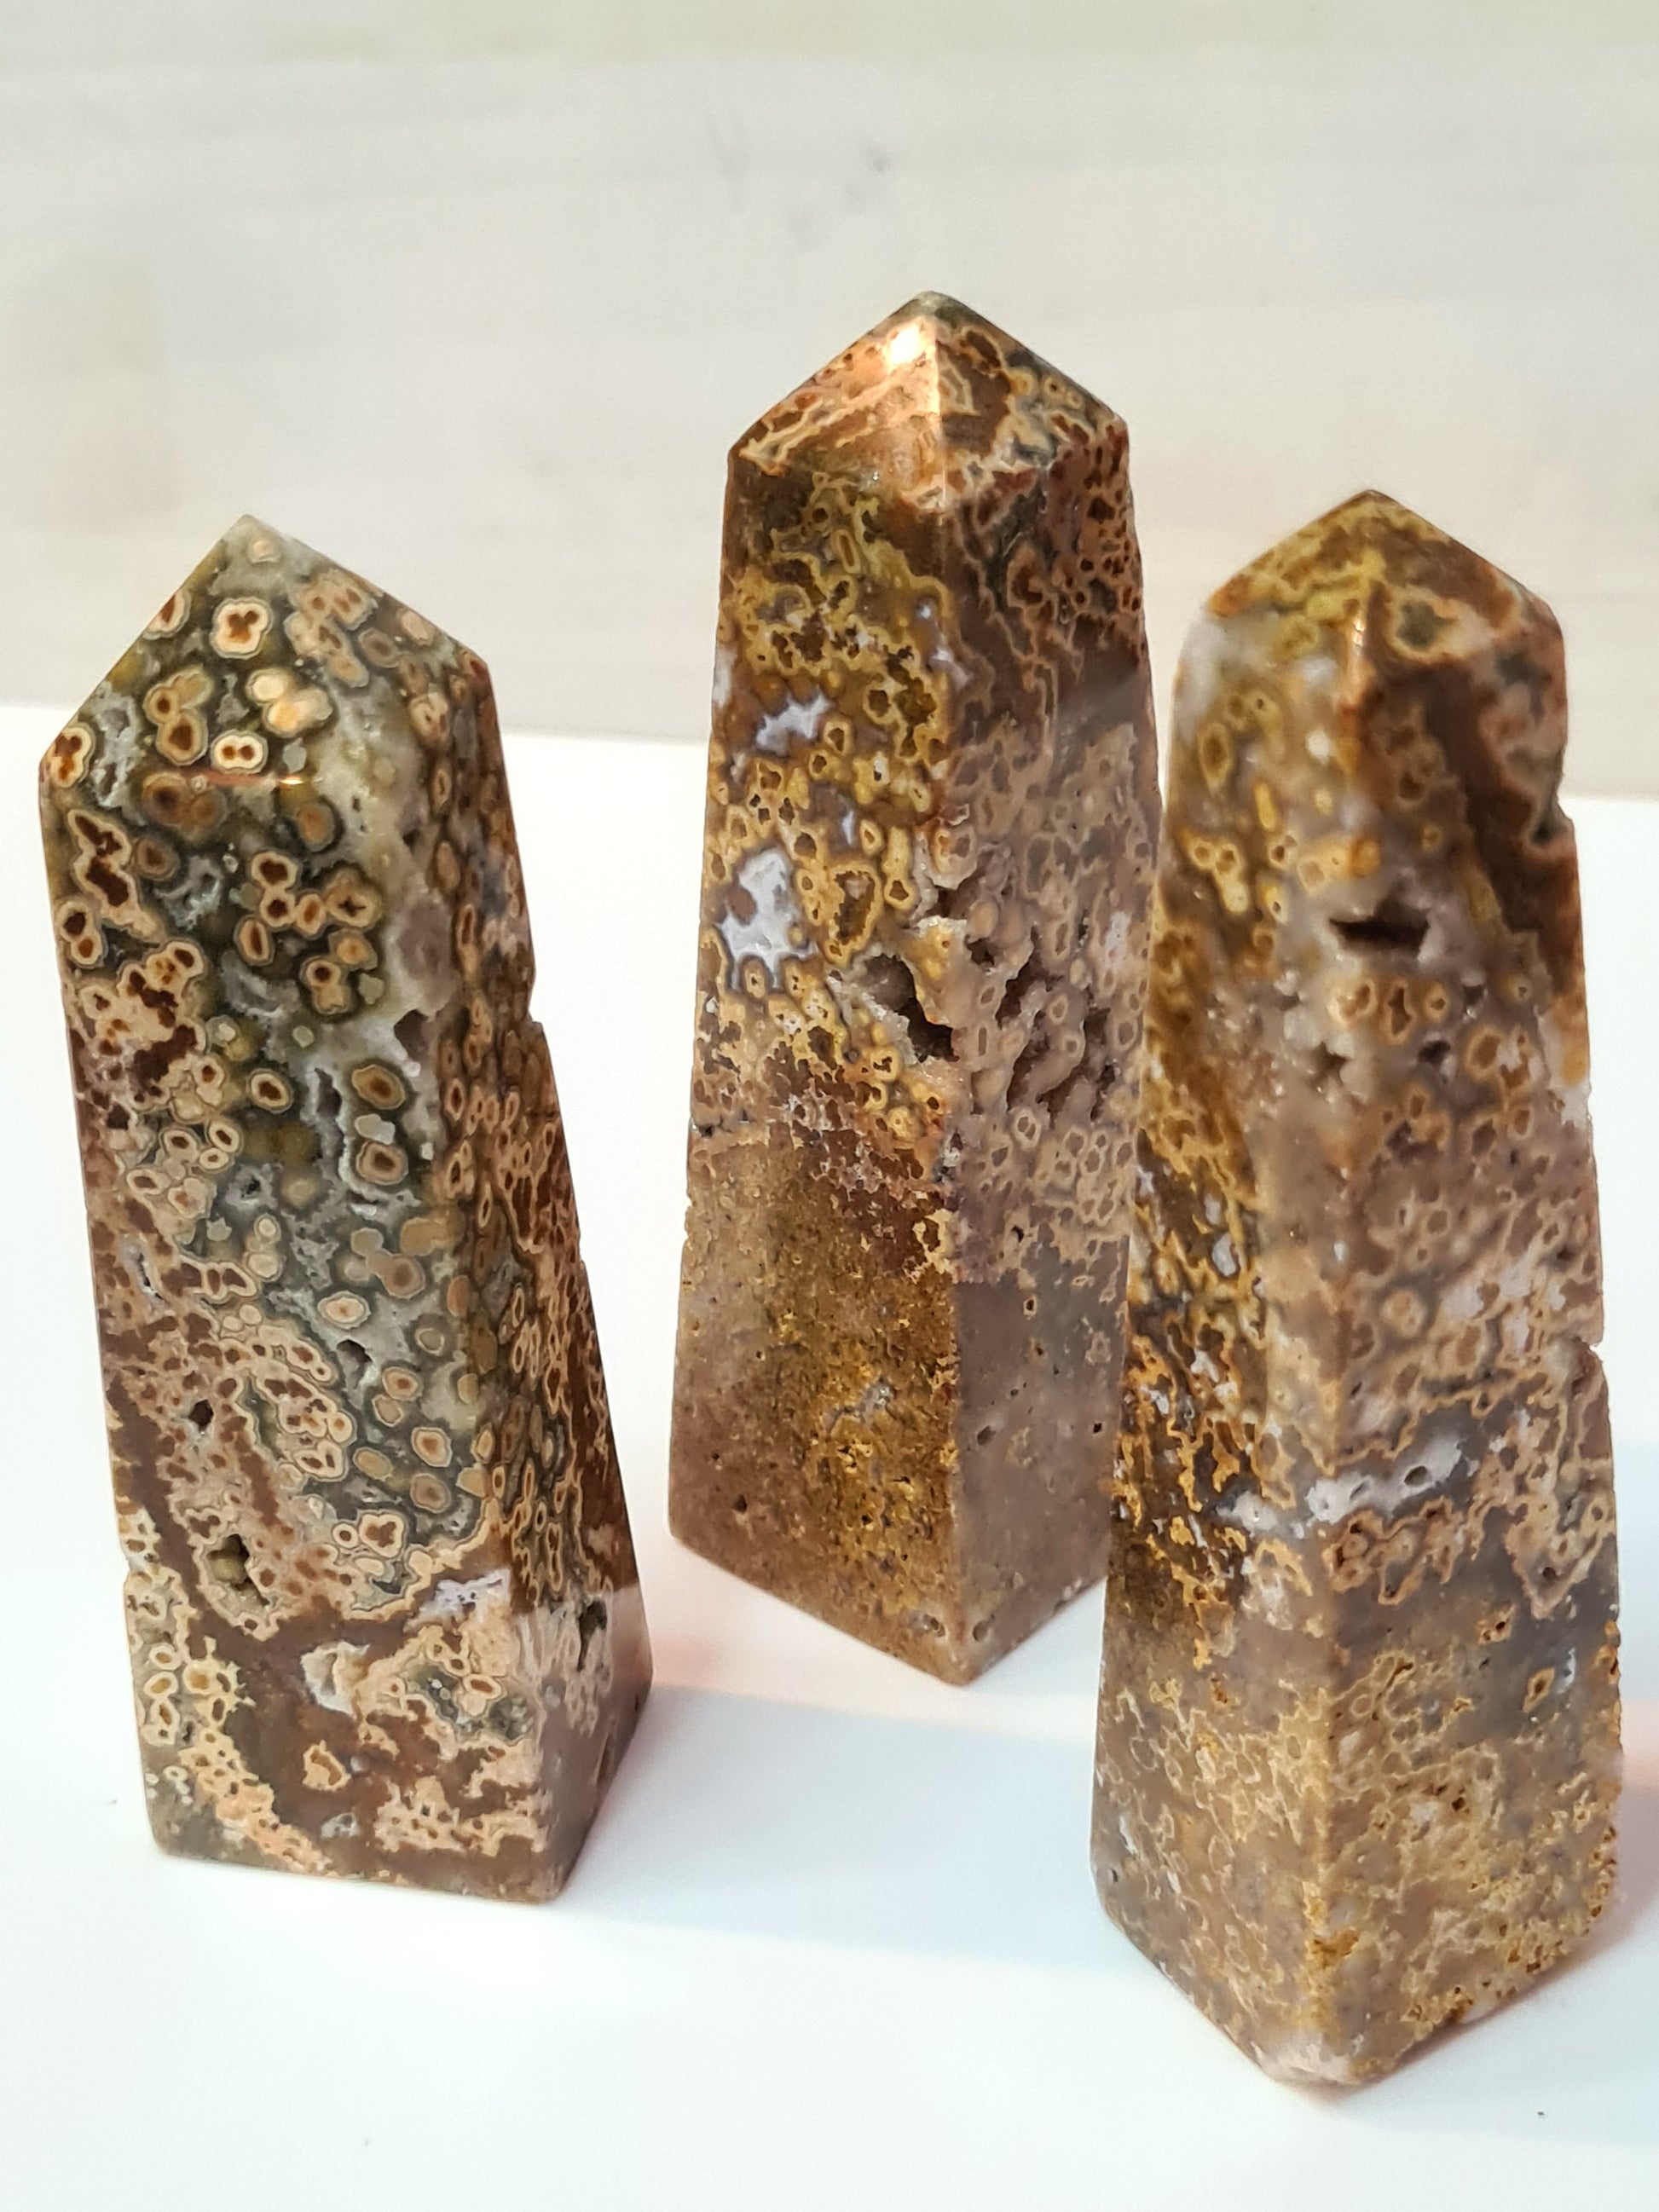 A collection of orbicular jasper obelisks in colours of yellow, mustard, green and white. Each has druzy pockets of quartz.